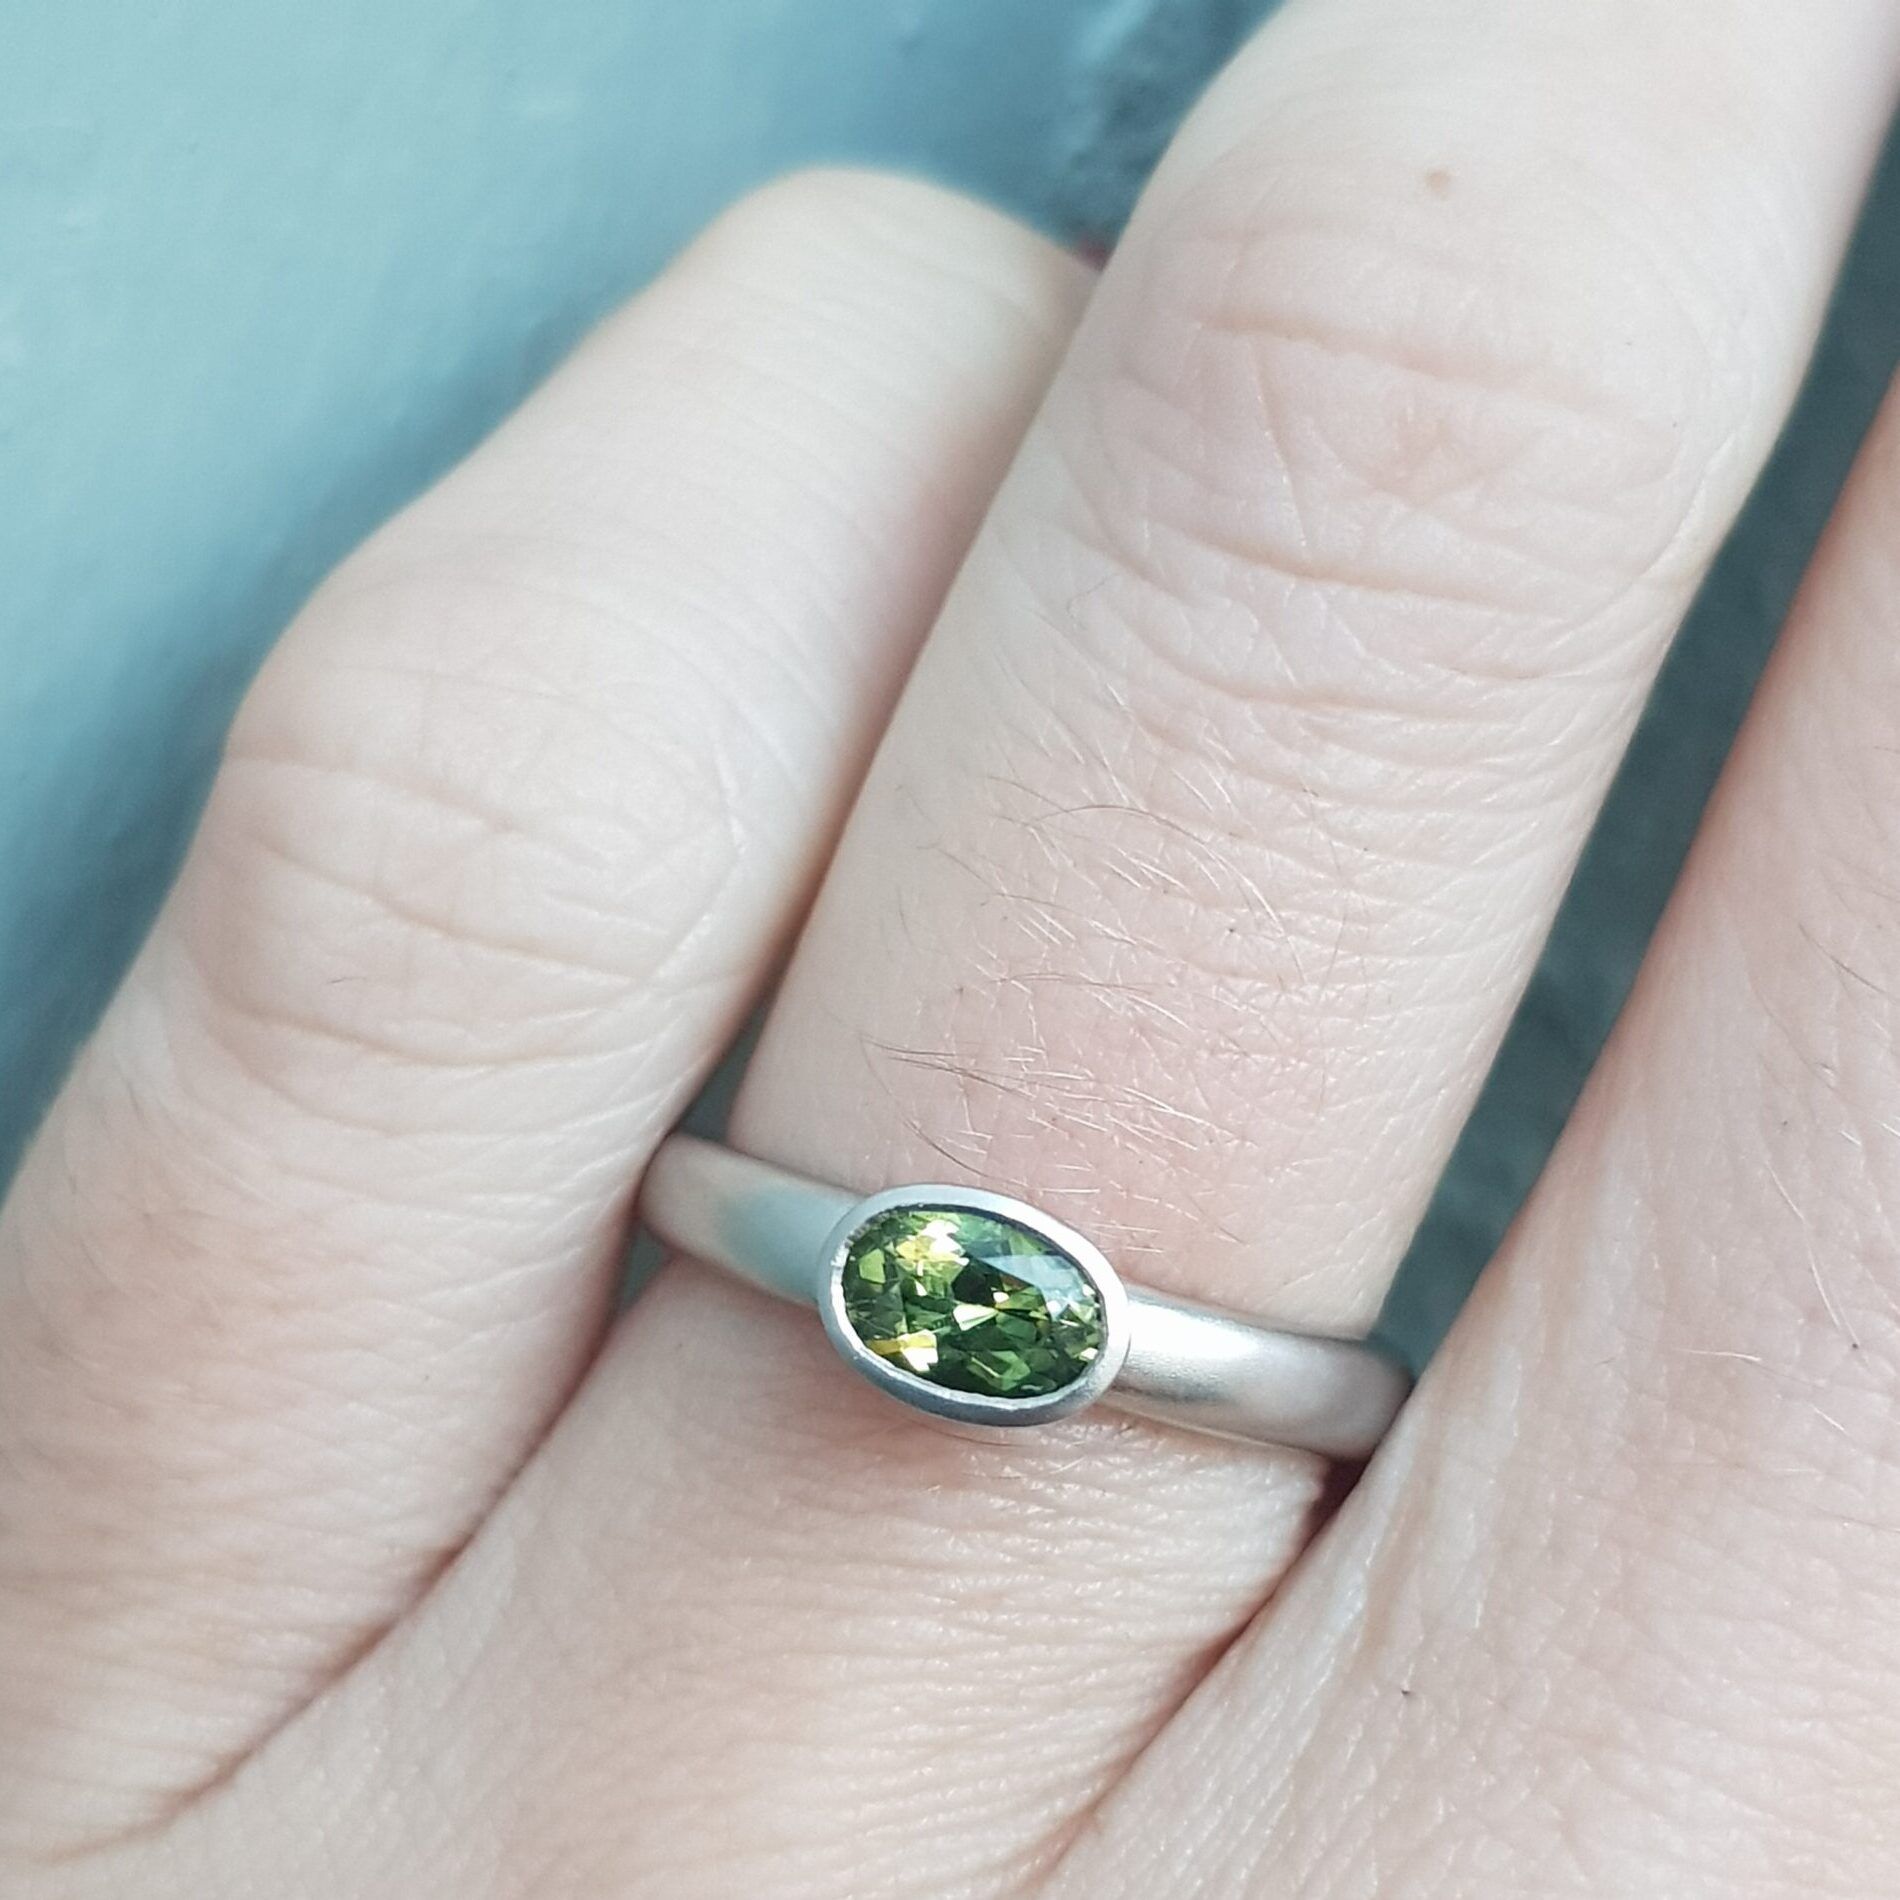 Flat Court Oval Platinum Ring With Green Sapphire – Jacks Turner – Clifton  Rocks Regarding Stackable Green Sapphire Rings (View 20 of 25)